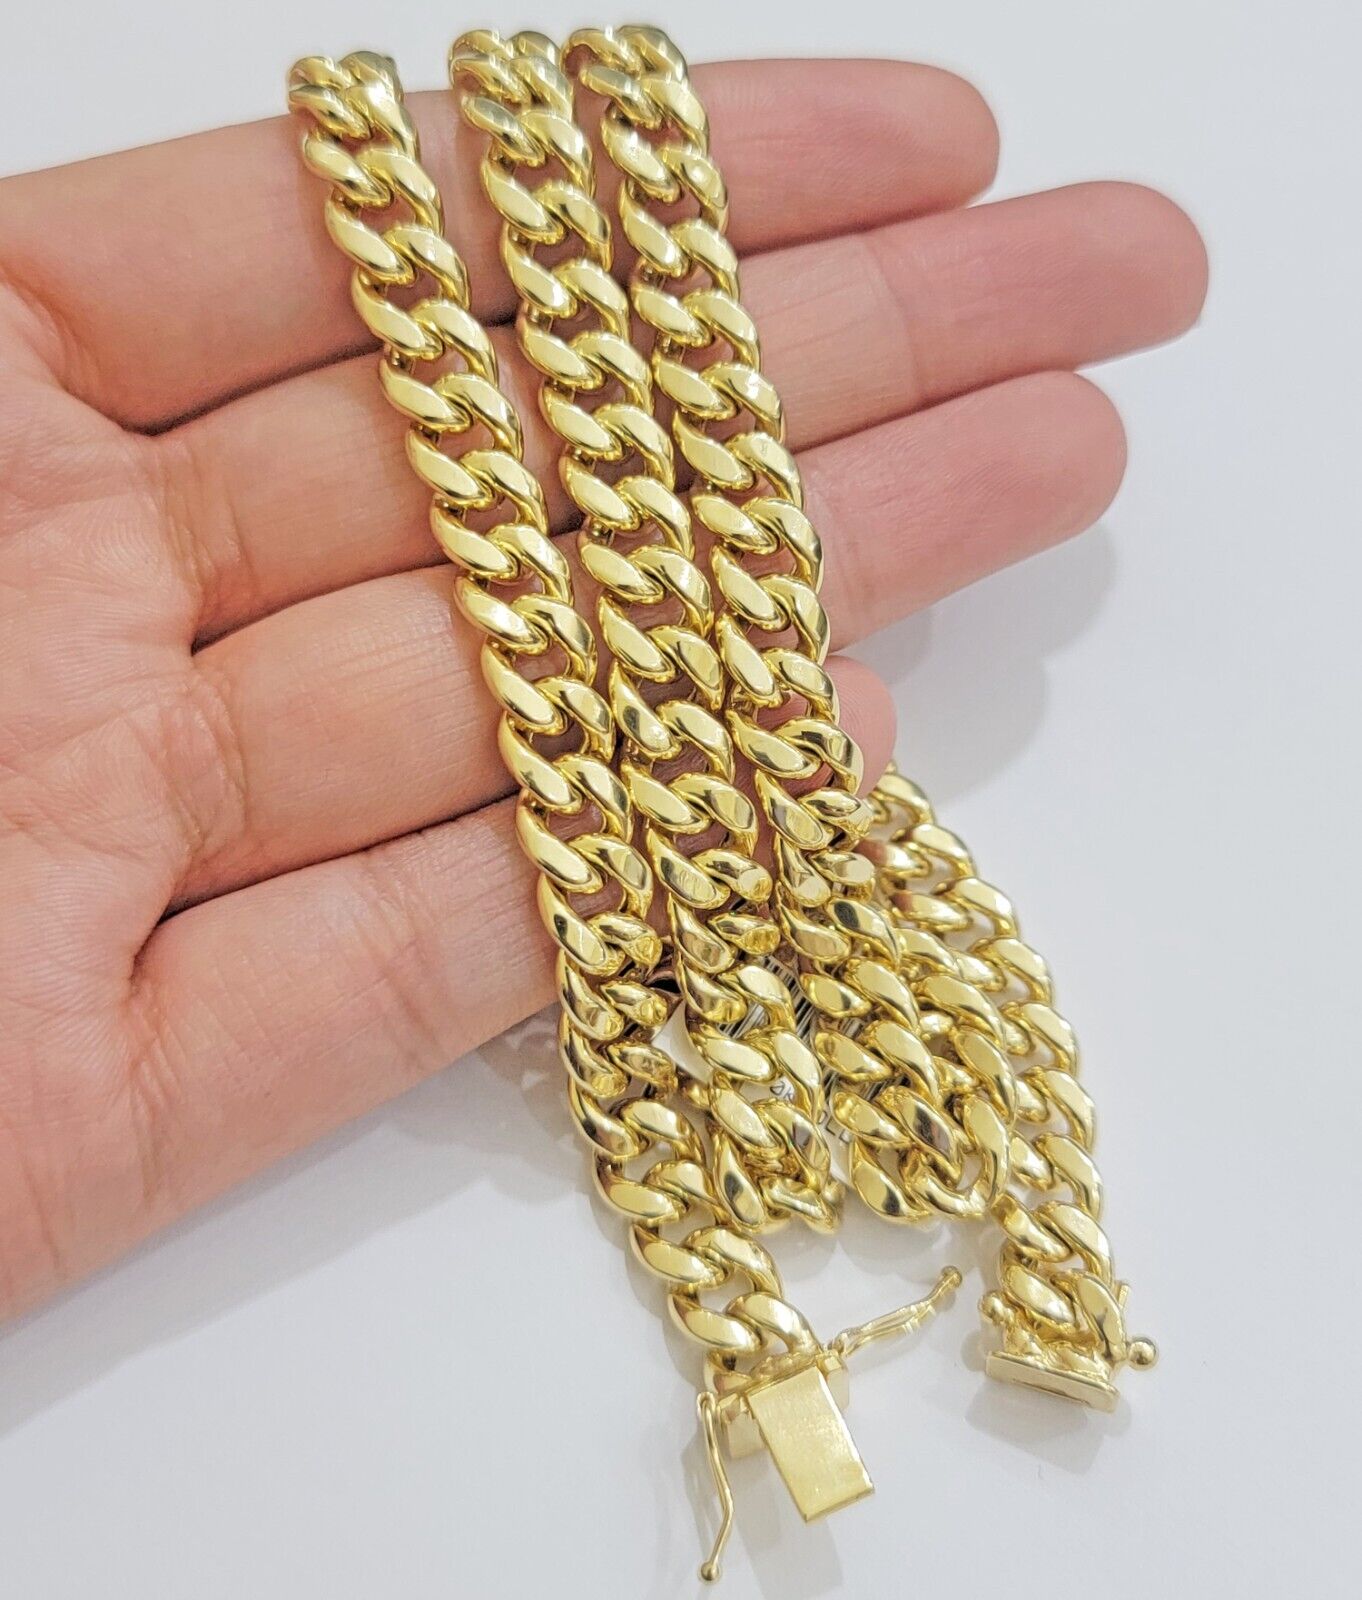 Beads 3mm Necklace in Gold 27-29